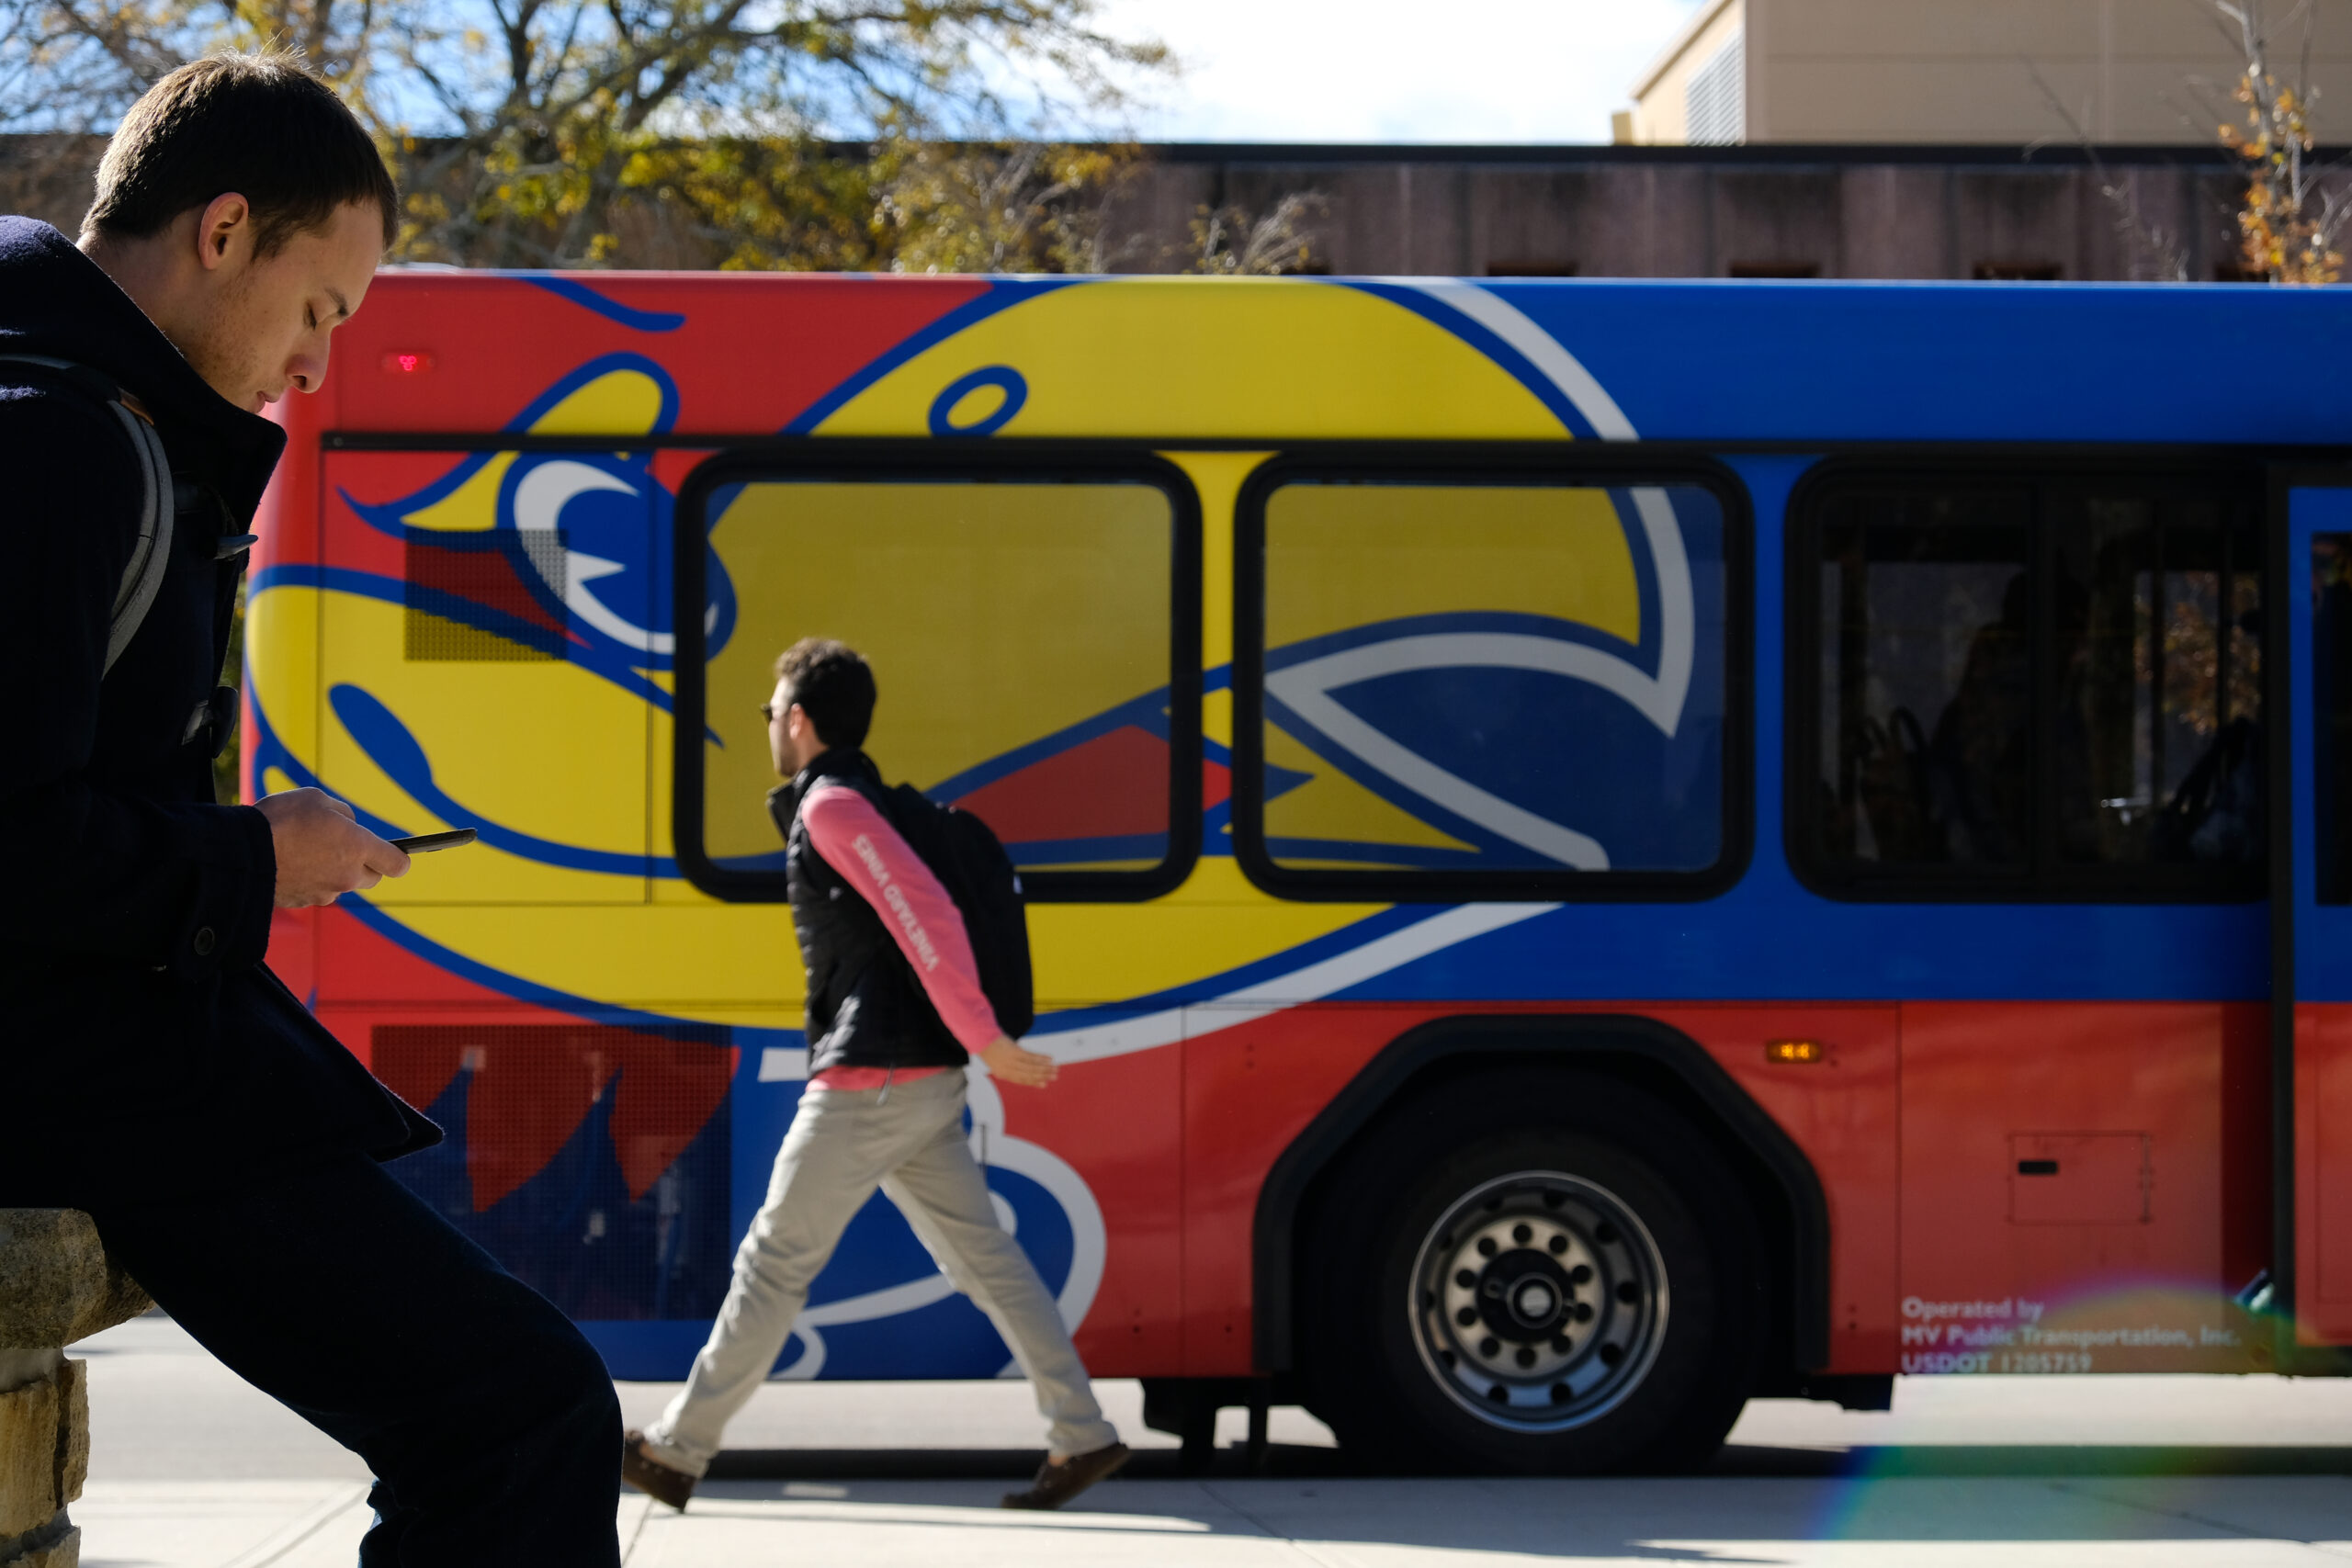 Featured image for “SafeBus connects KU students to popular destinations”